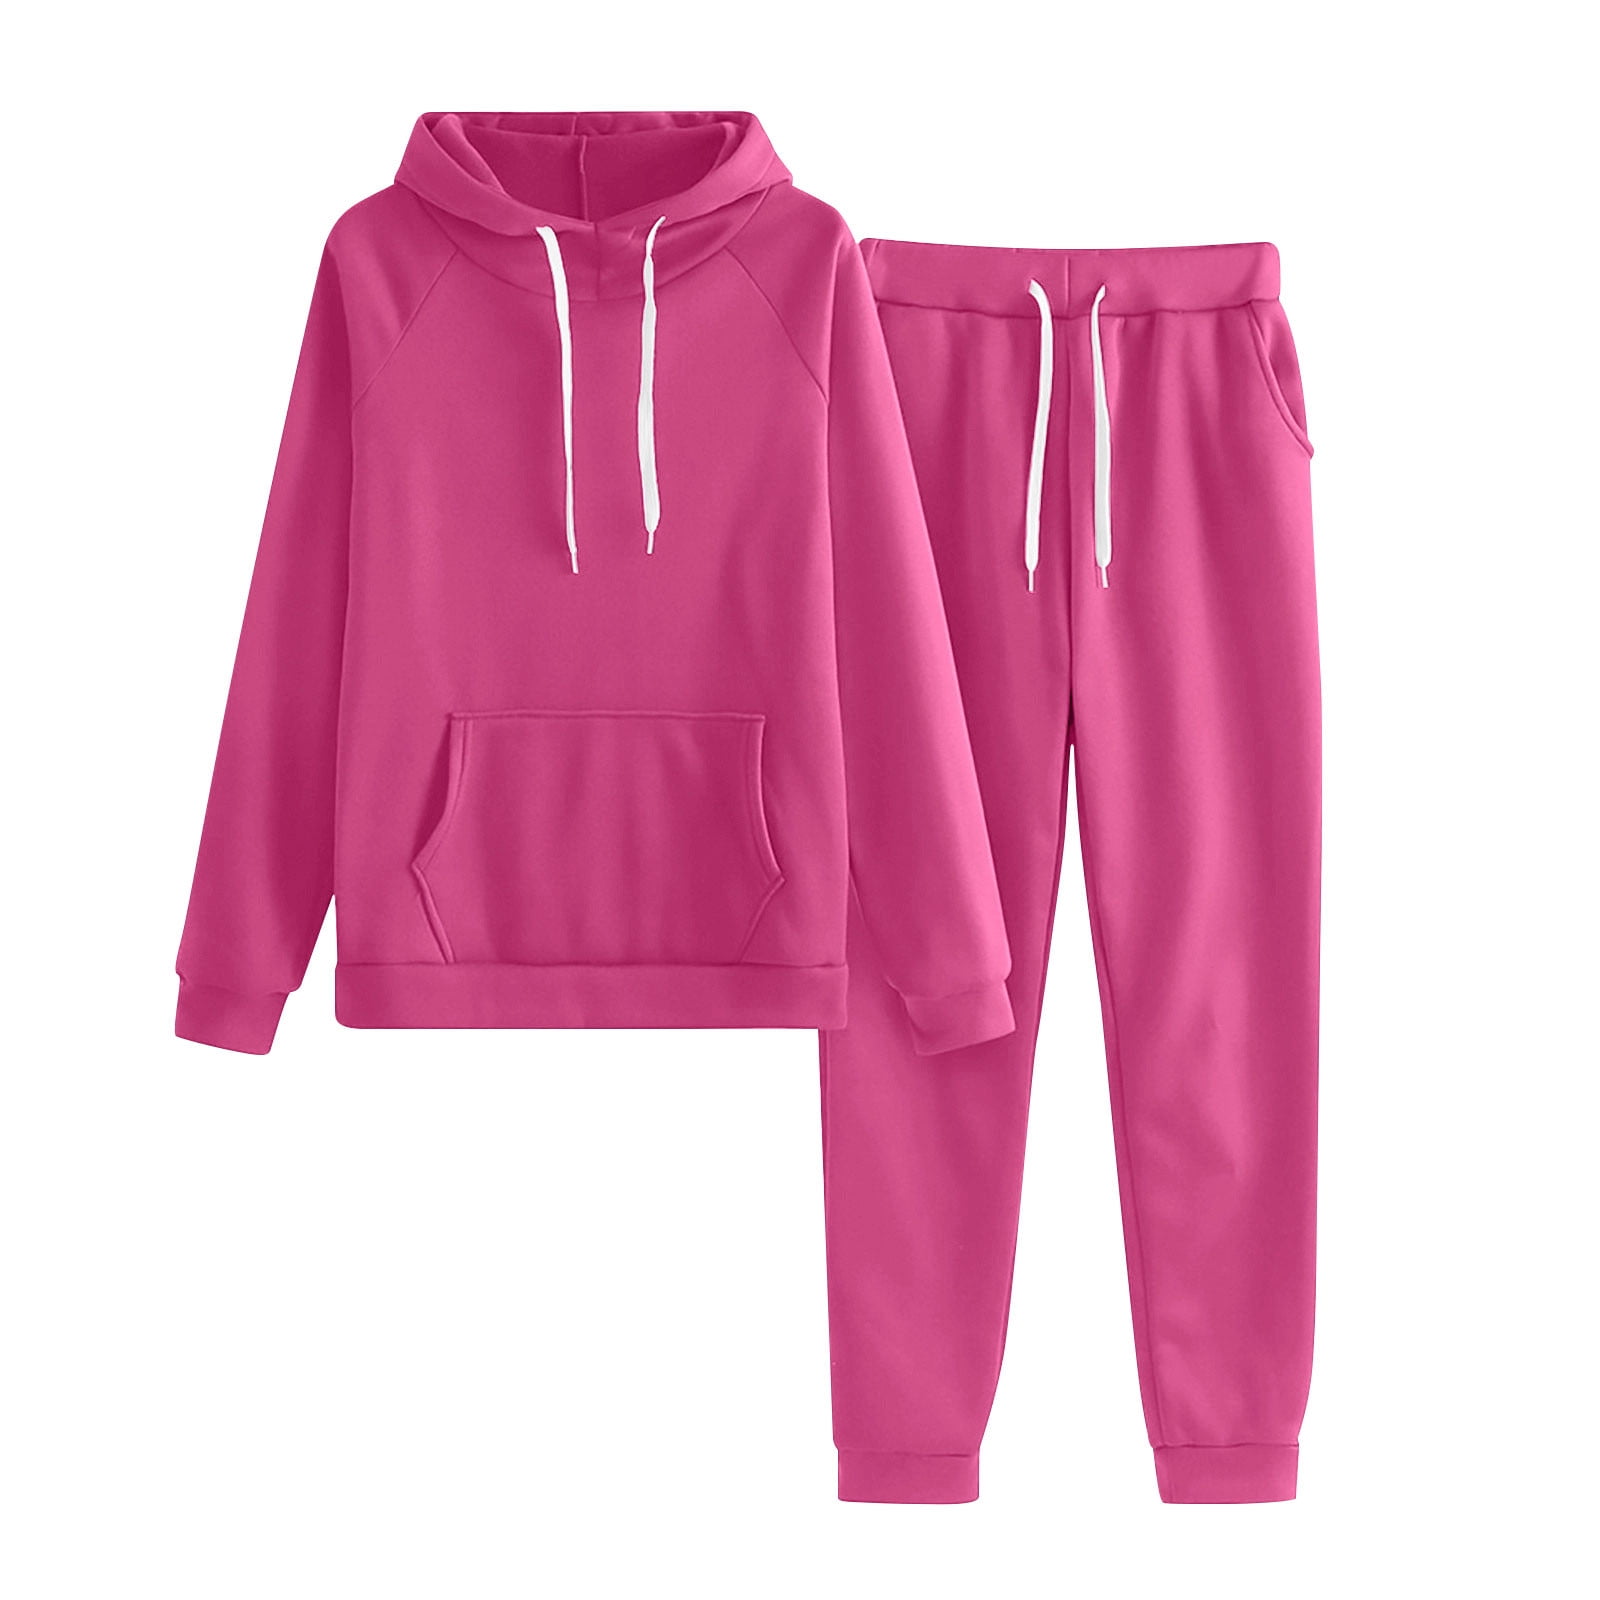 BLVB Women Jogger Outfit Matching Sweat Suits Long Sleeve Hooded ...